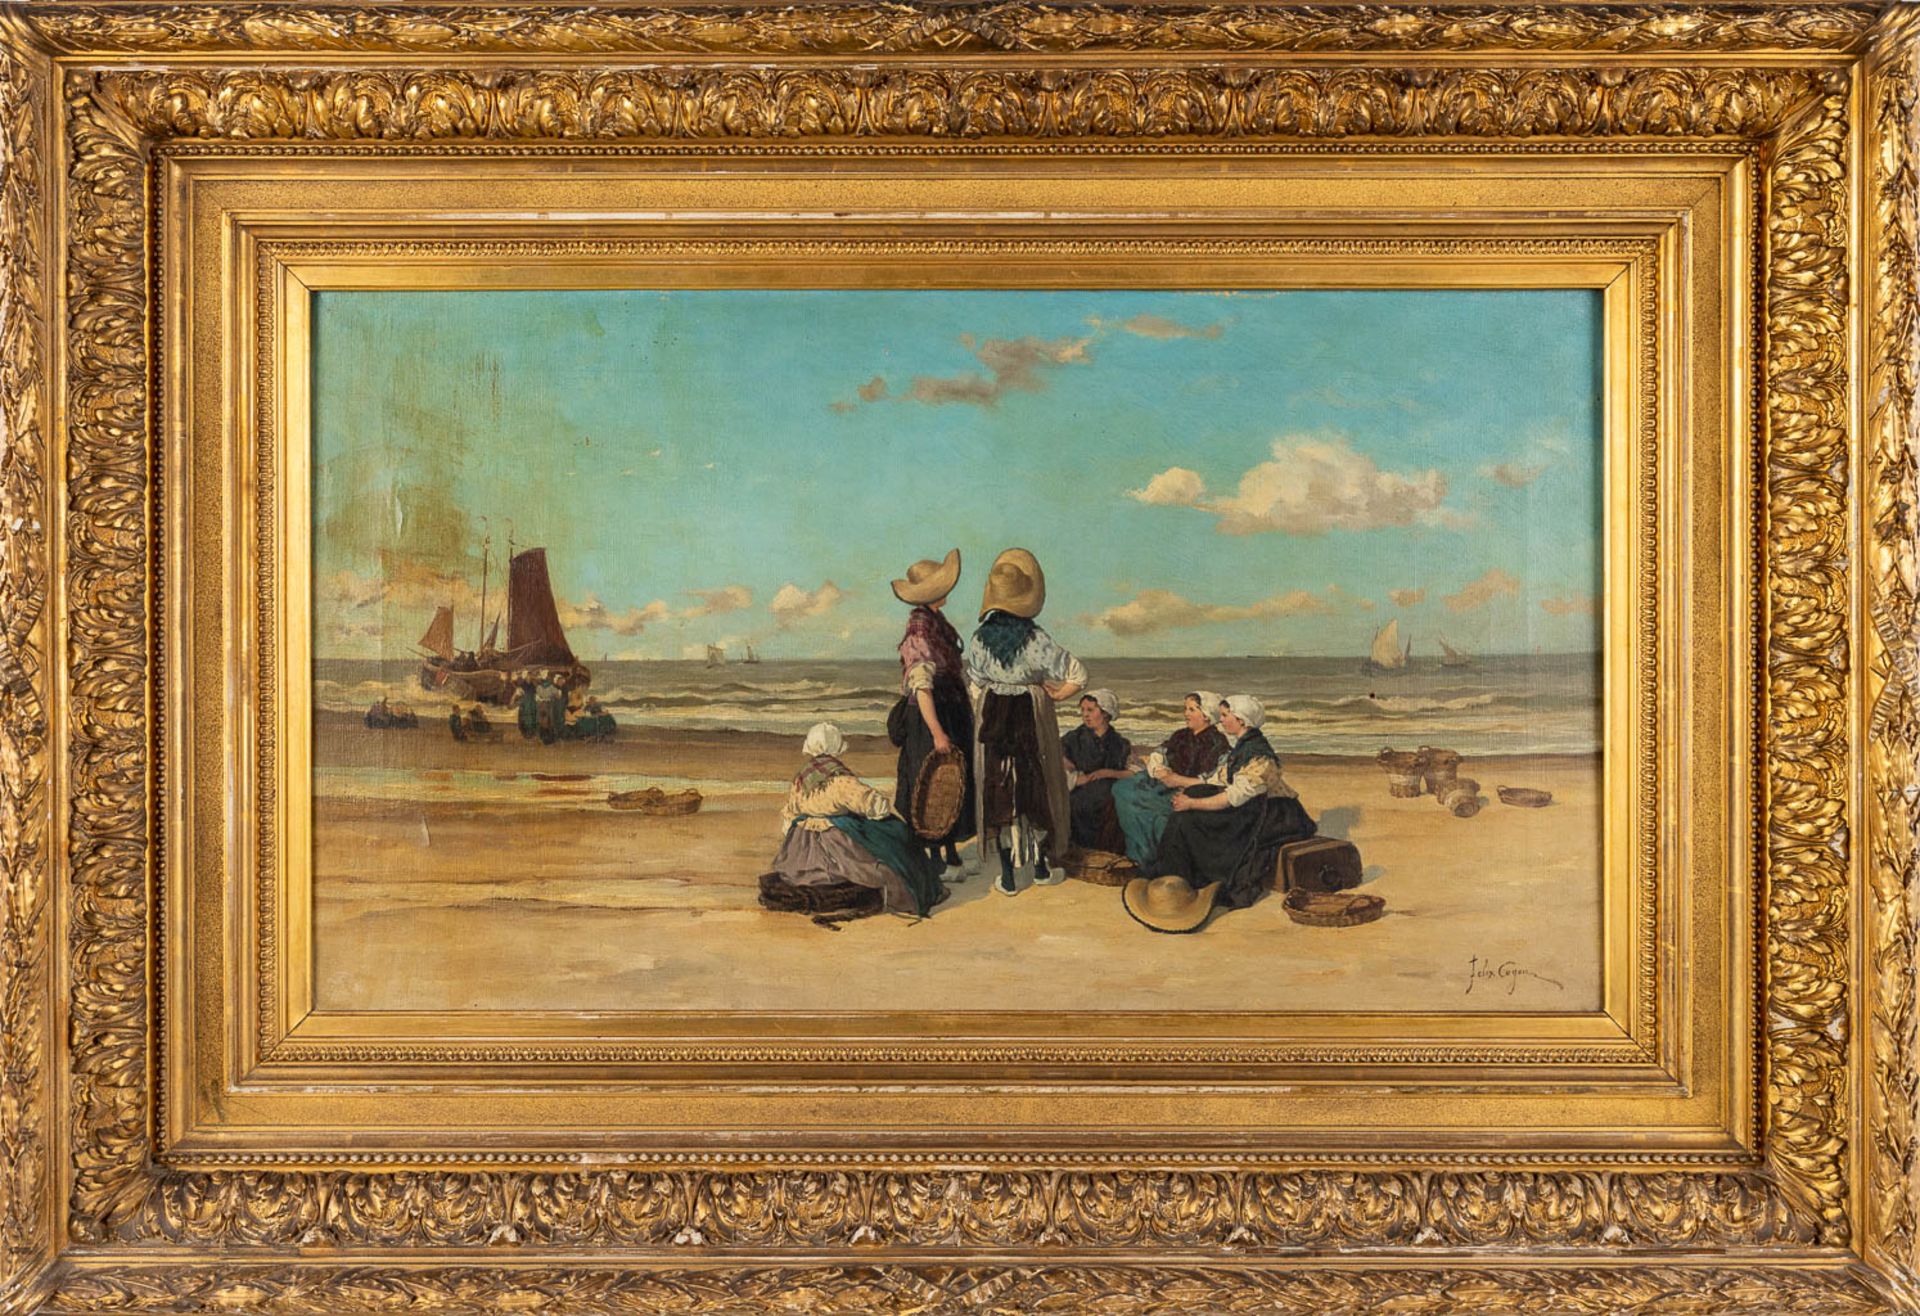 Félix COGEN (1838-1907) 'Fisherman's wife on the beach' oil on canvas. (W:80 x H:45 cm) - Image 3 of 9